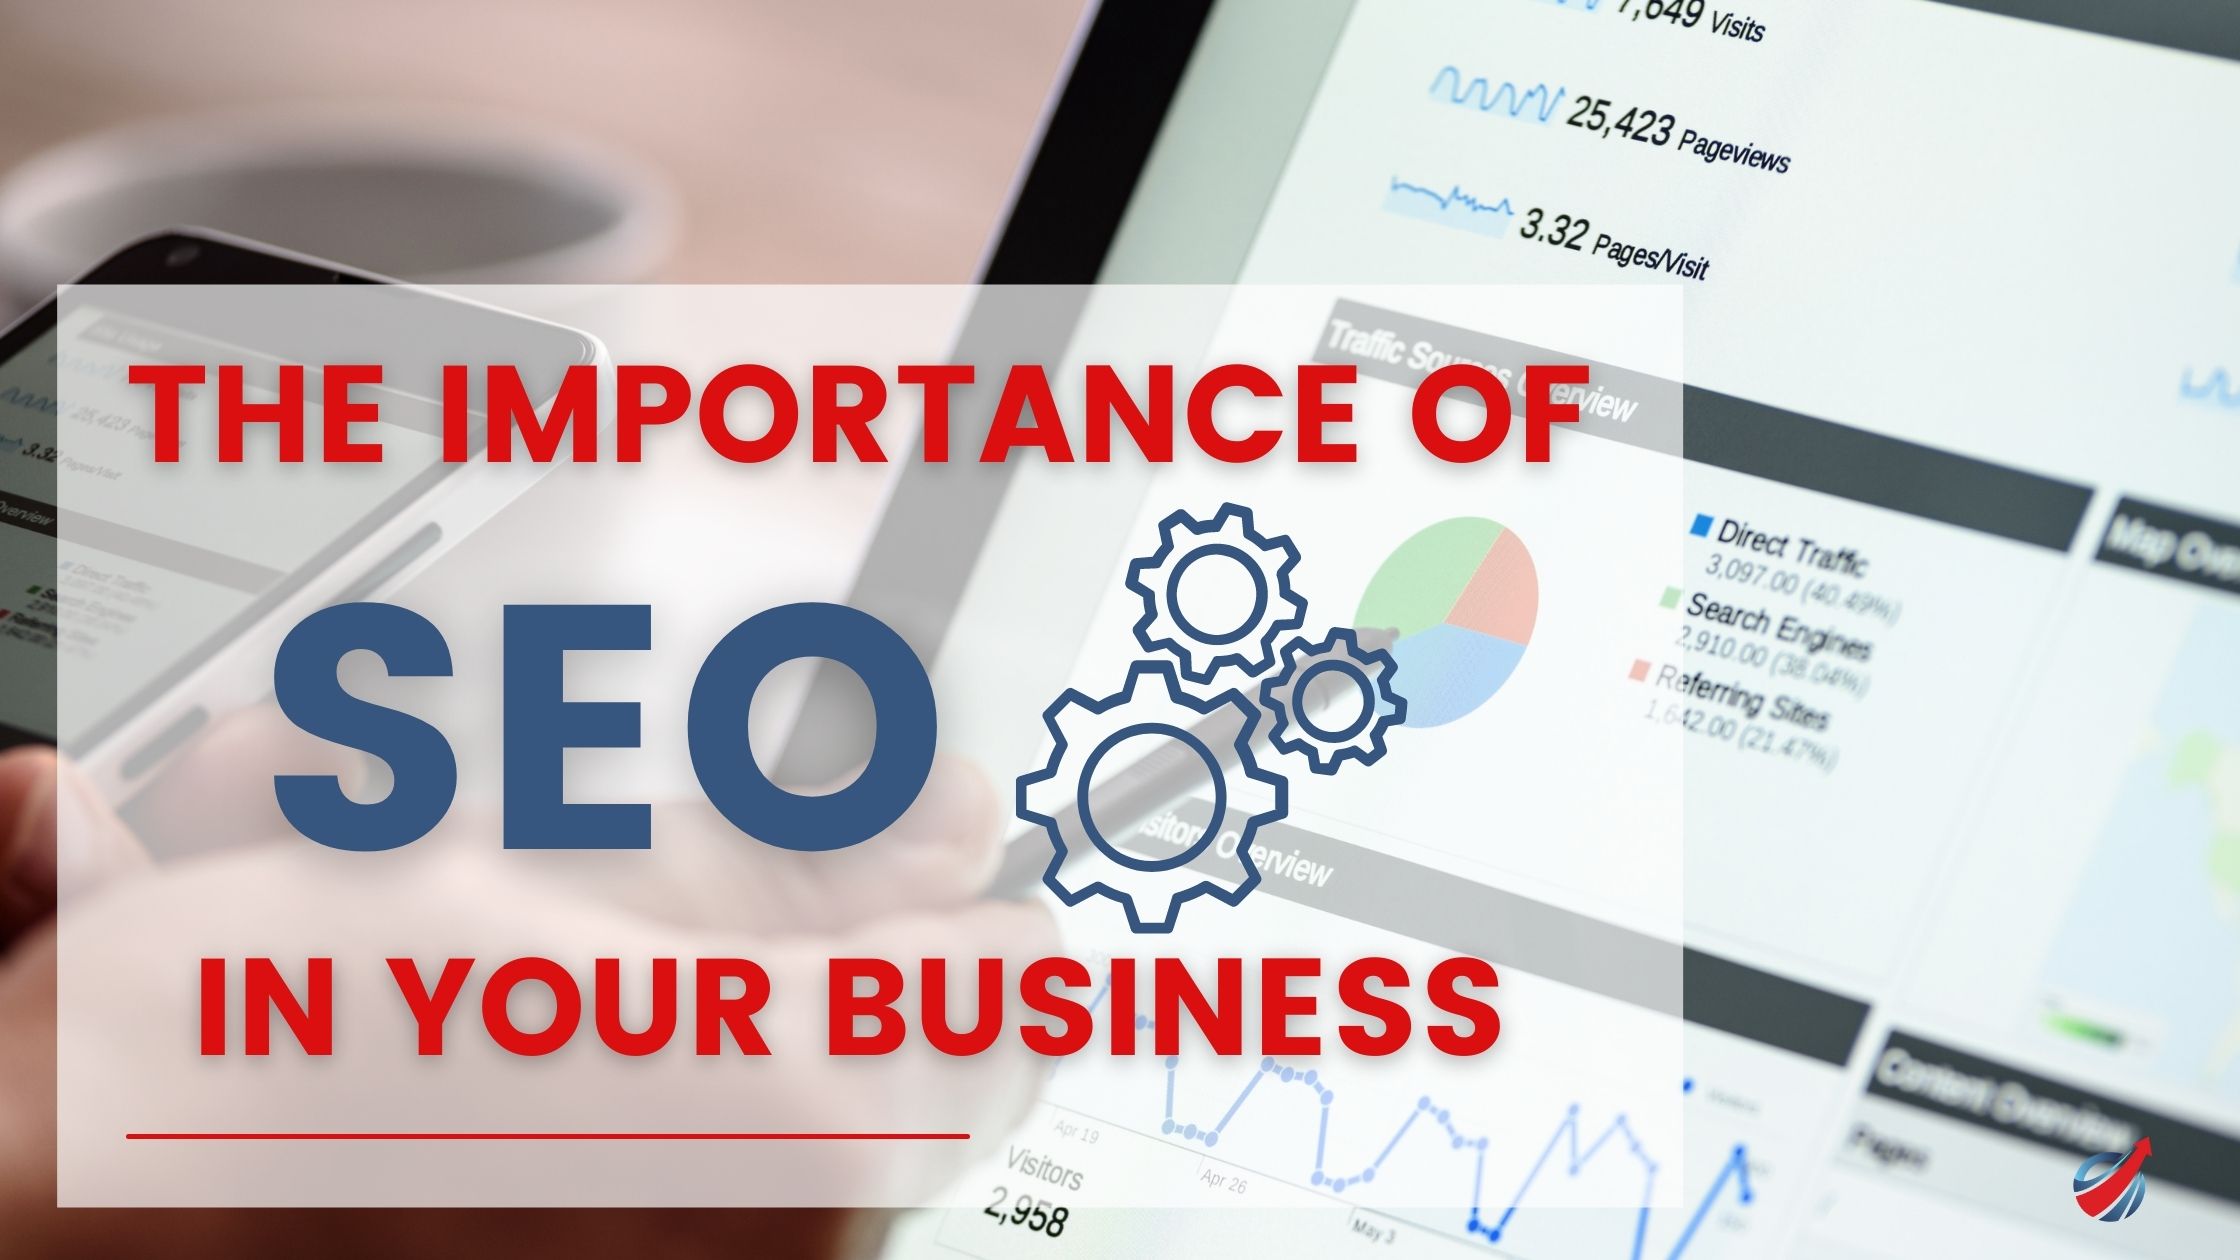 The importance of seo in your business banner